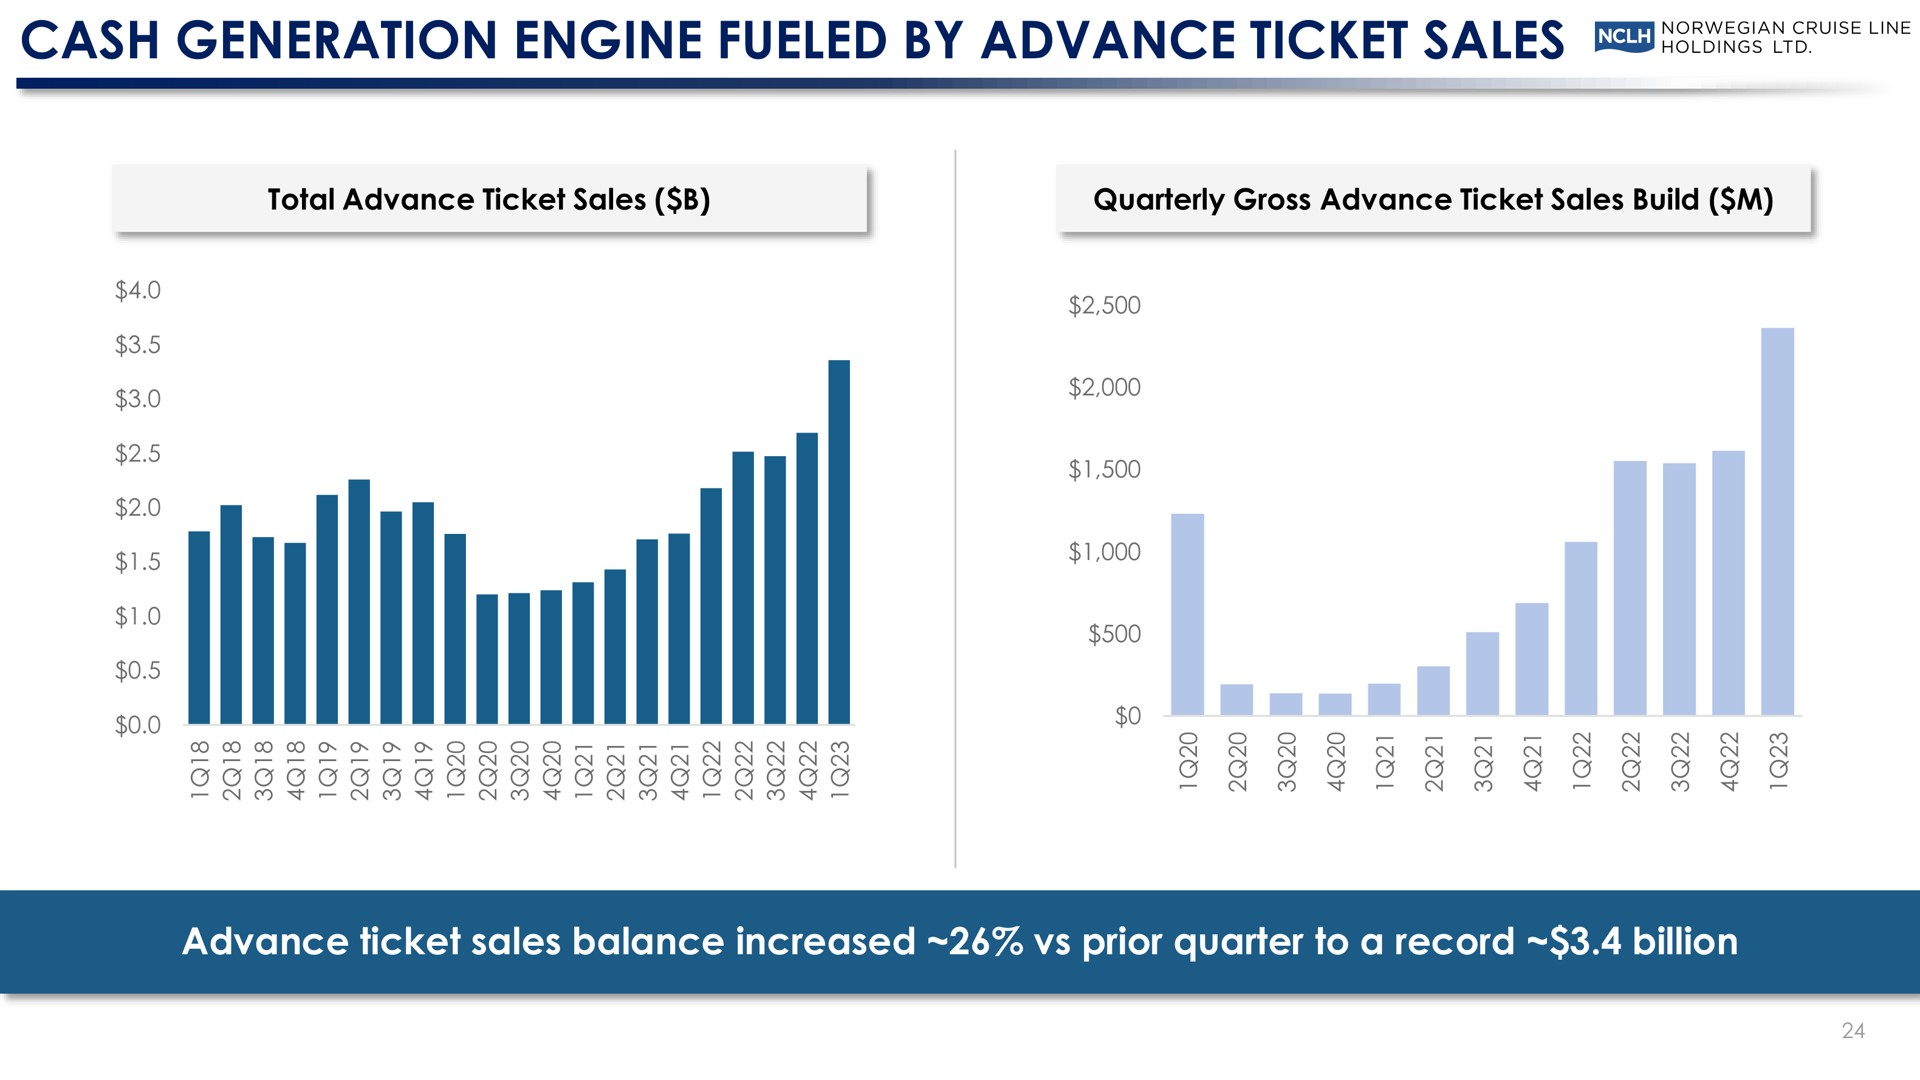 cash generation engine fueled by advance ticket sales advance ticket sales balance increased prior quarter to a record billion | Norwegian Cruise Line